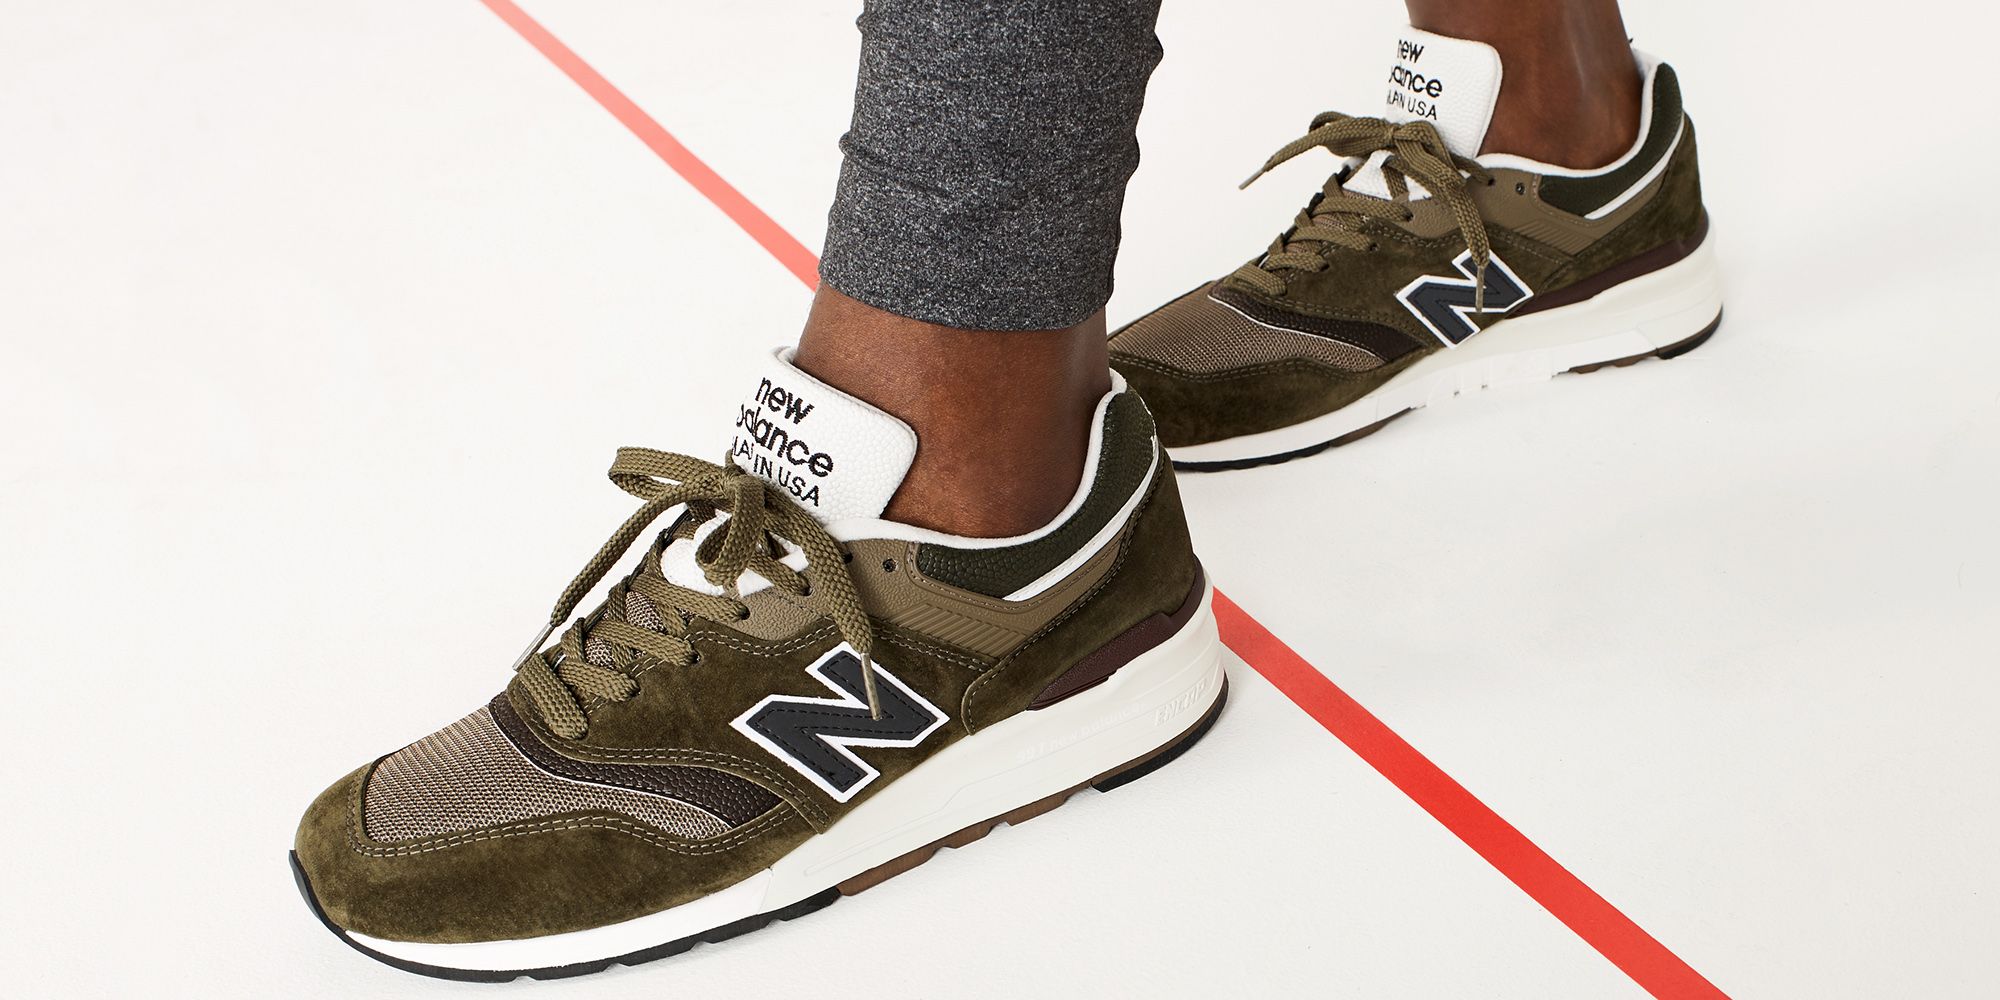 communication scrap Imagination J.Crew and New Balance Just Dropped a Sneaker for Fall - New Balance 997  for J.Crew